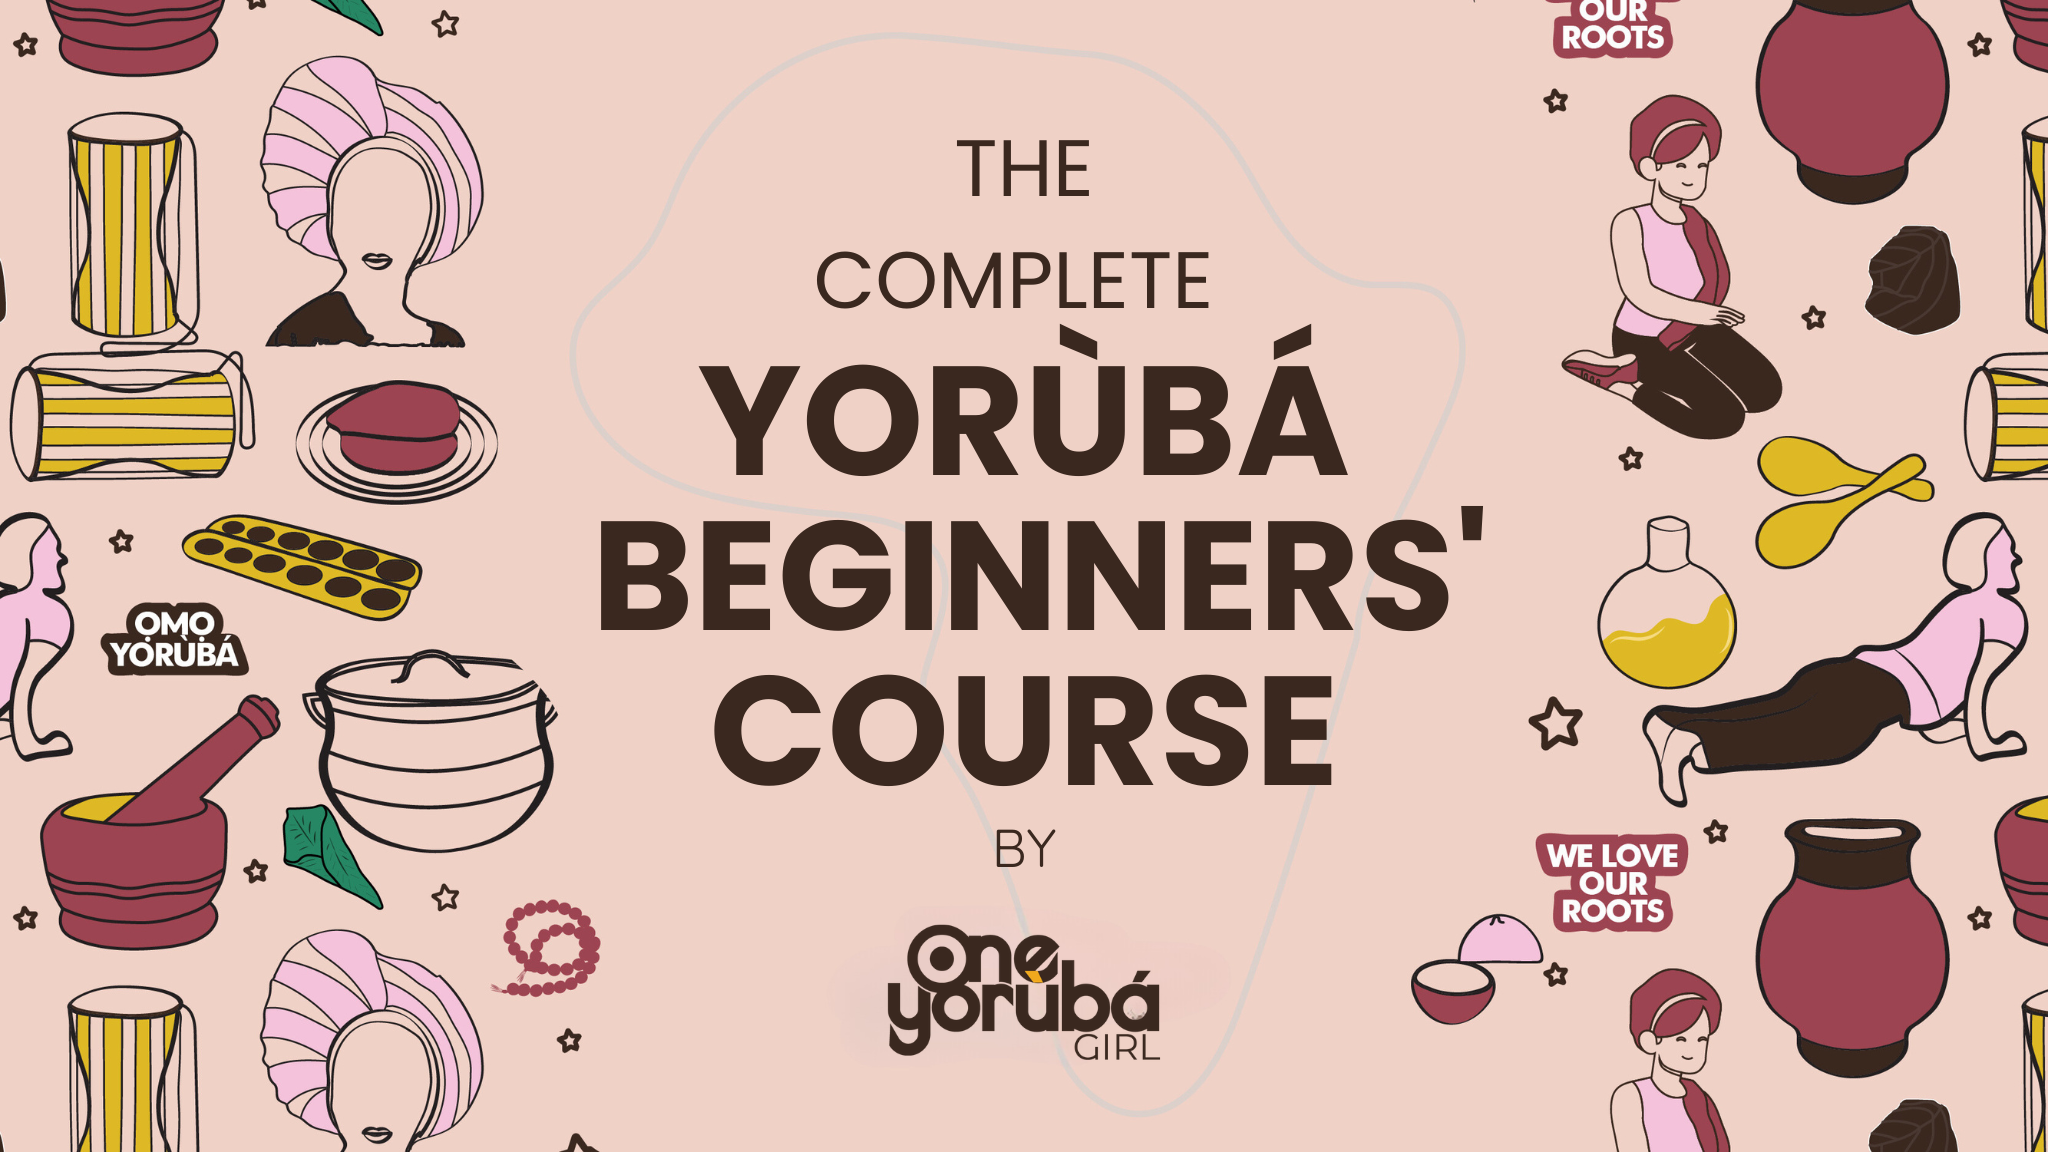 The Complete Yorùbá Beginners’ Course